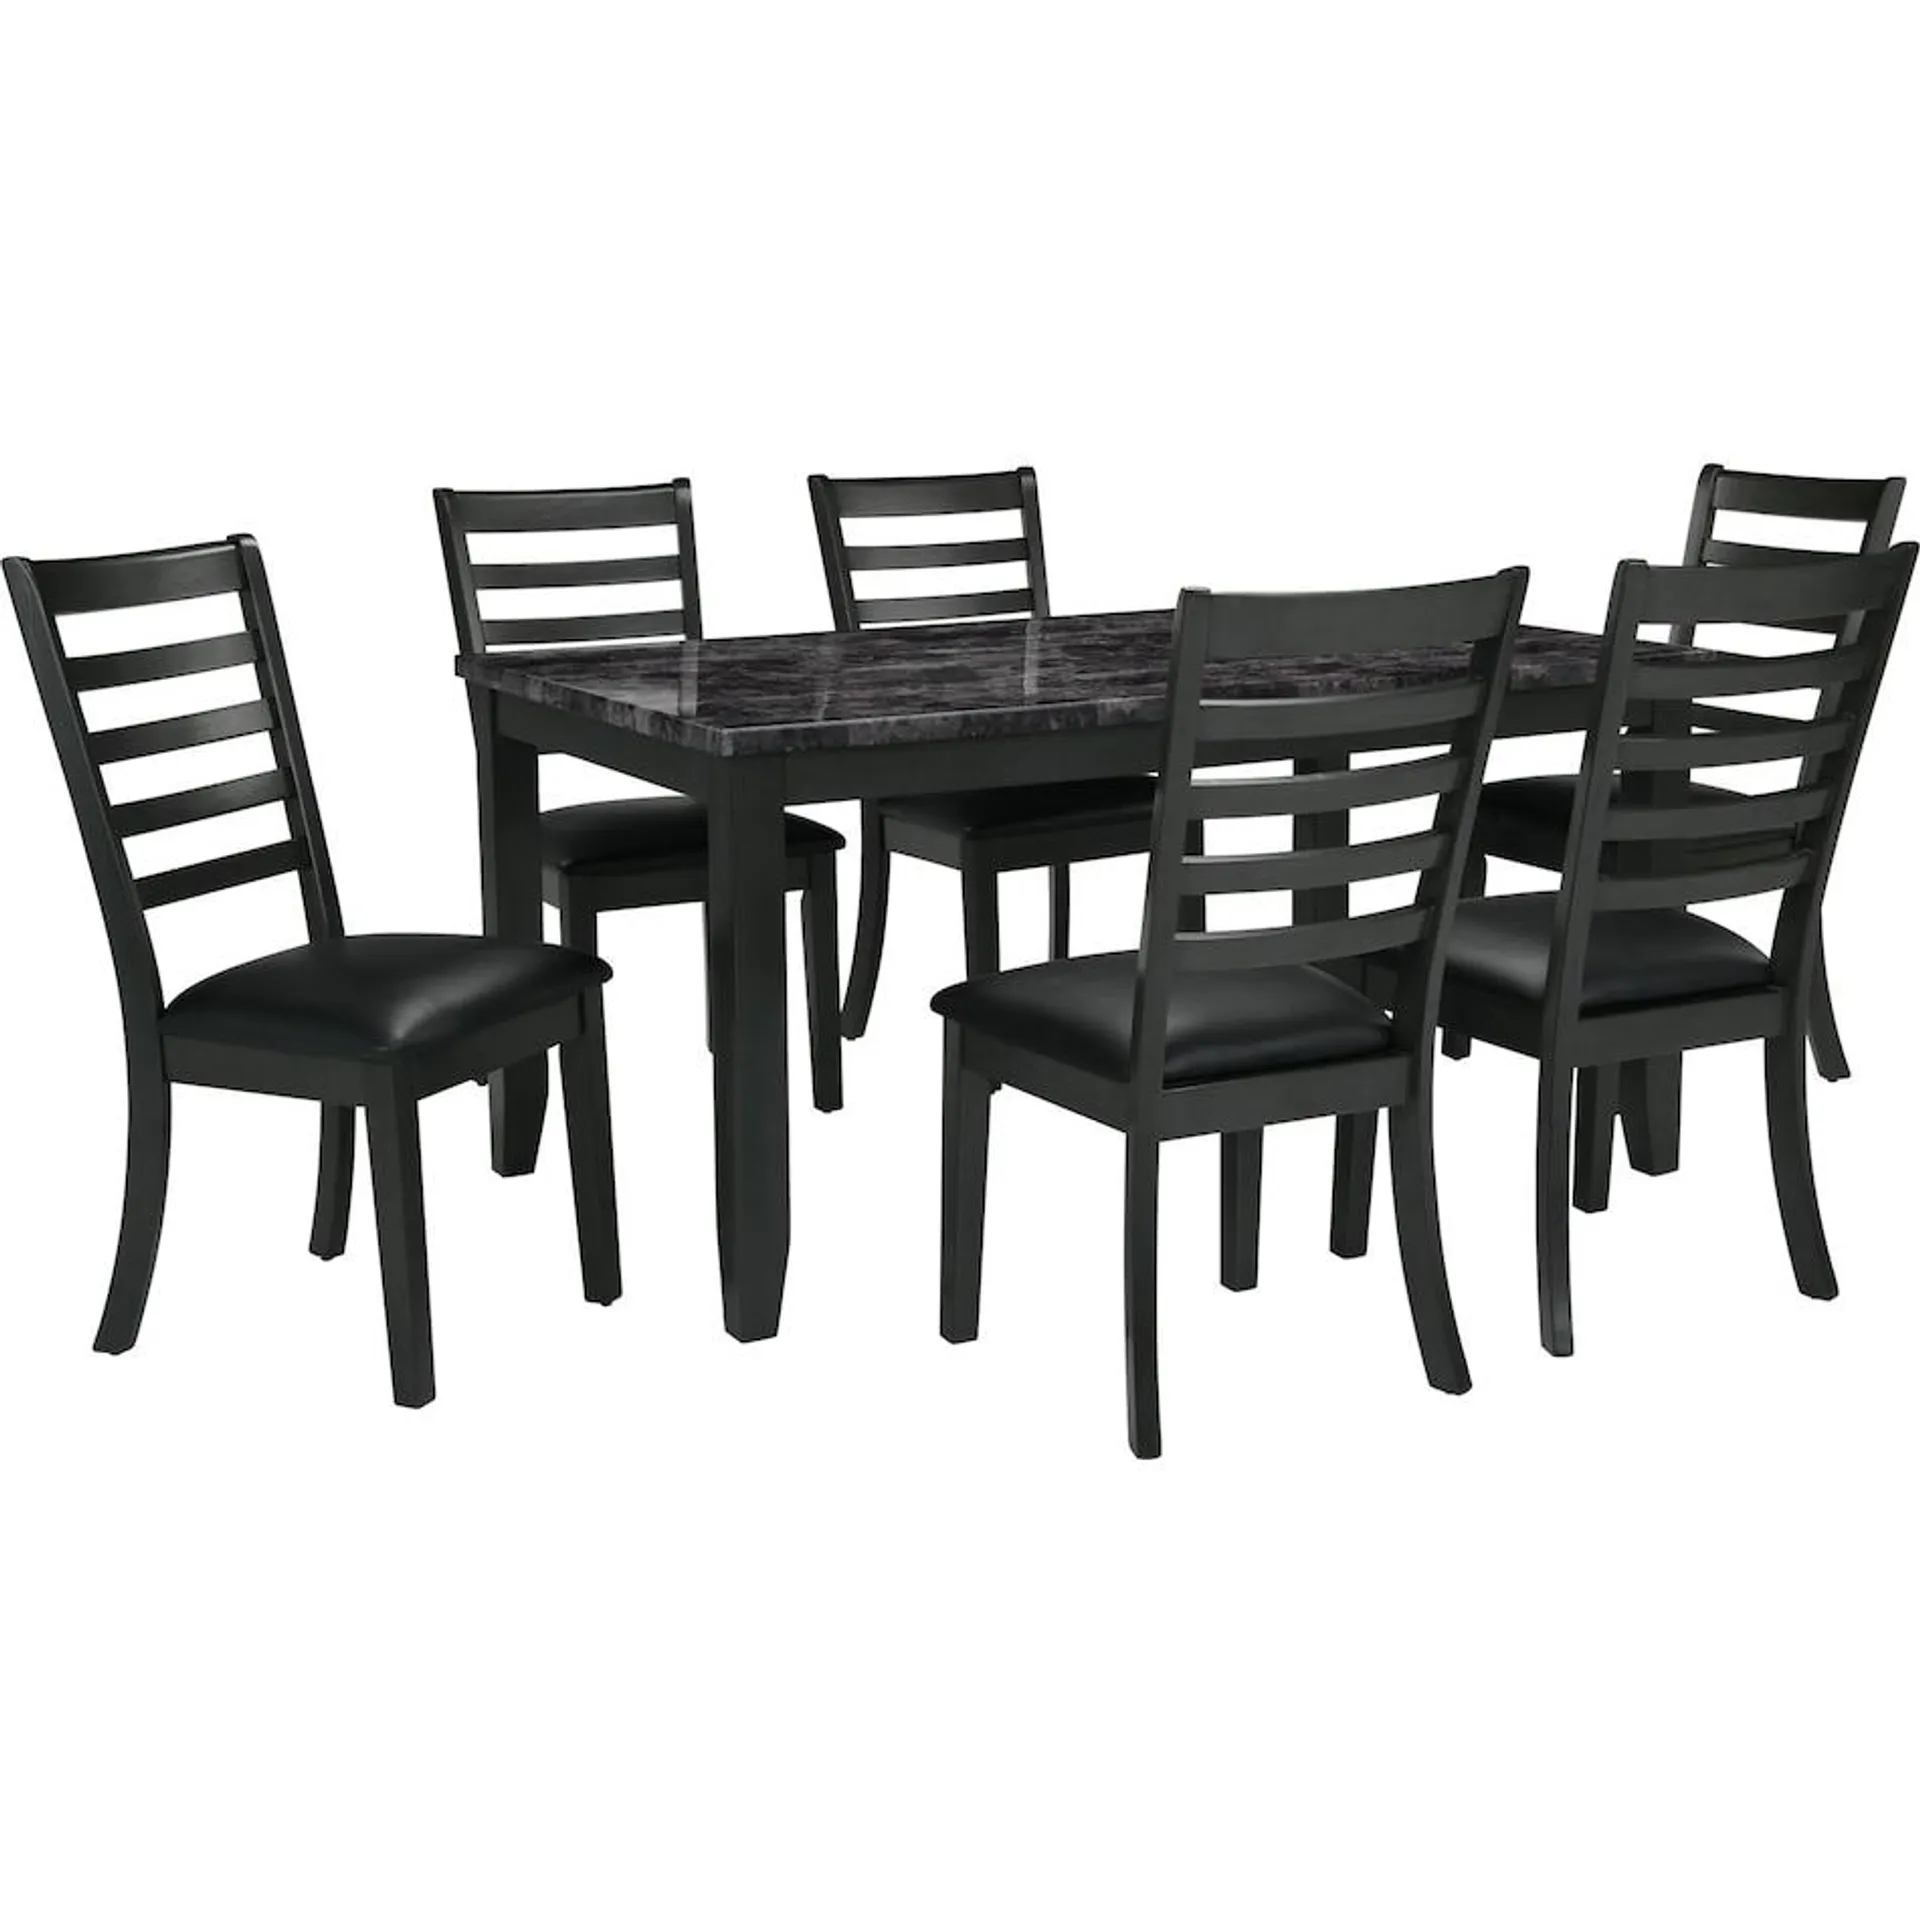 Brandon Dining Table with 6 Dining Chairs - Grey